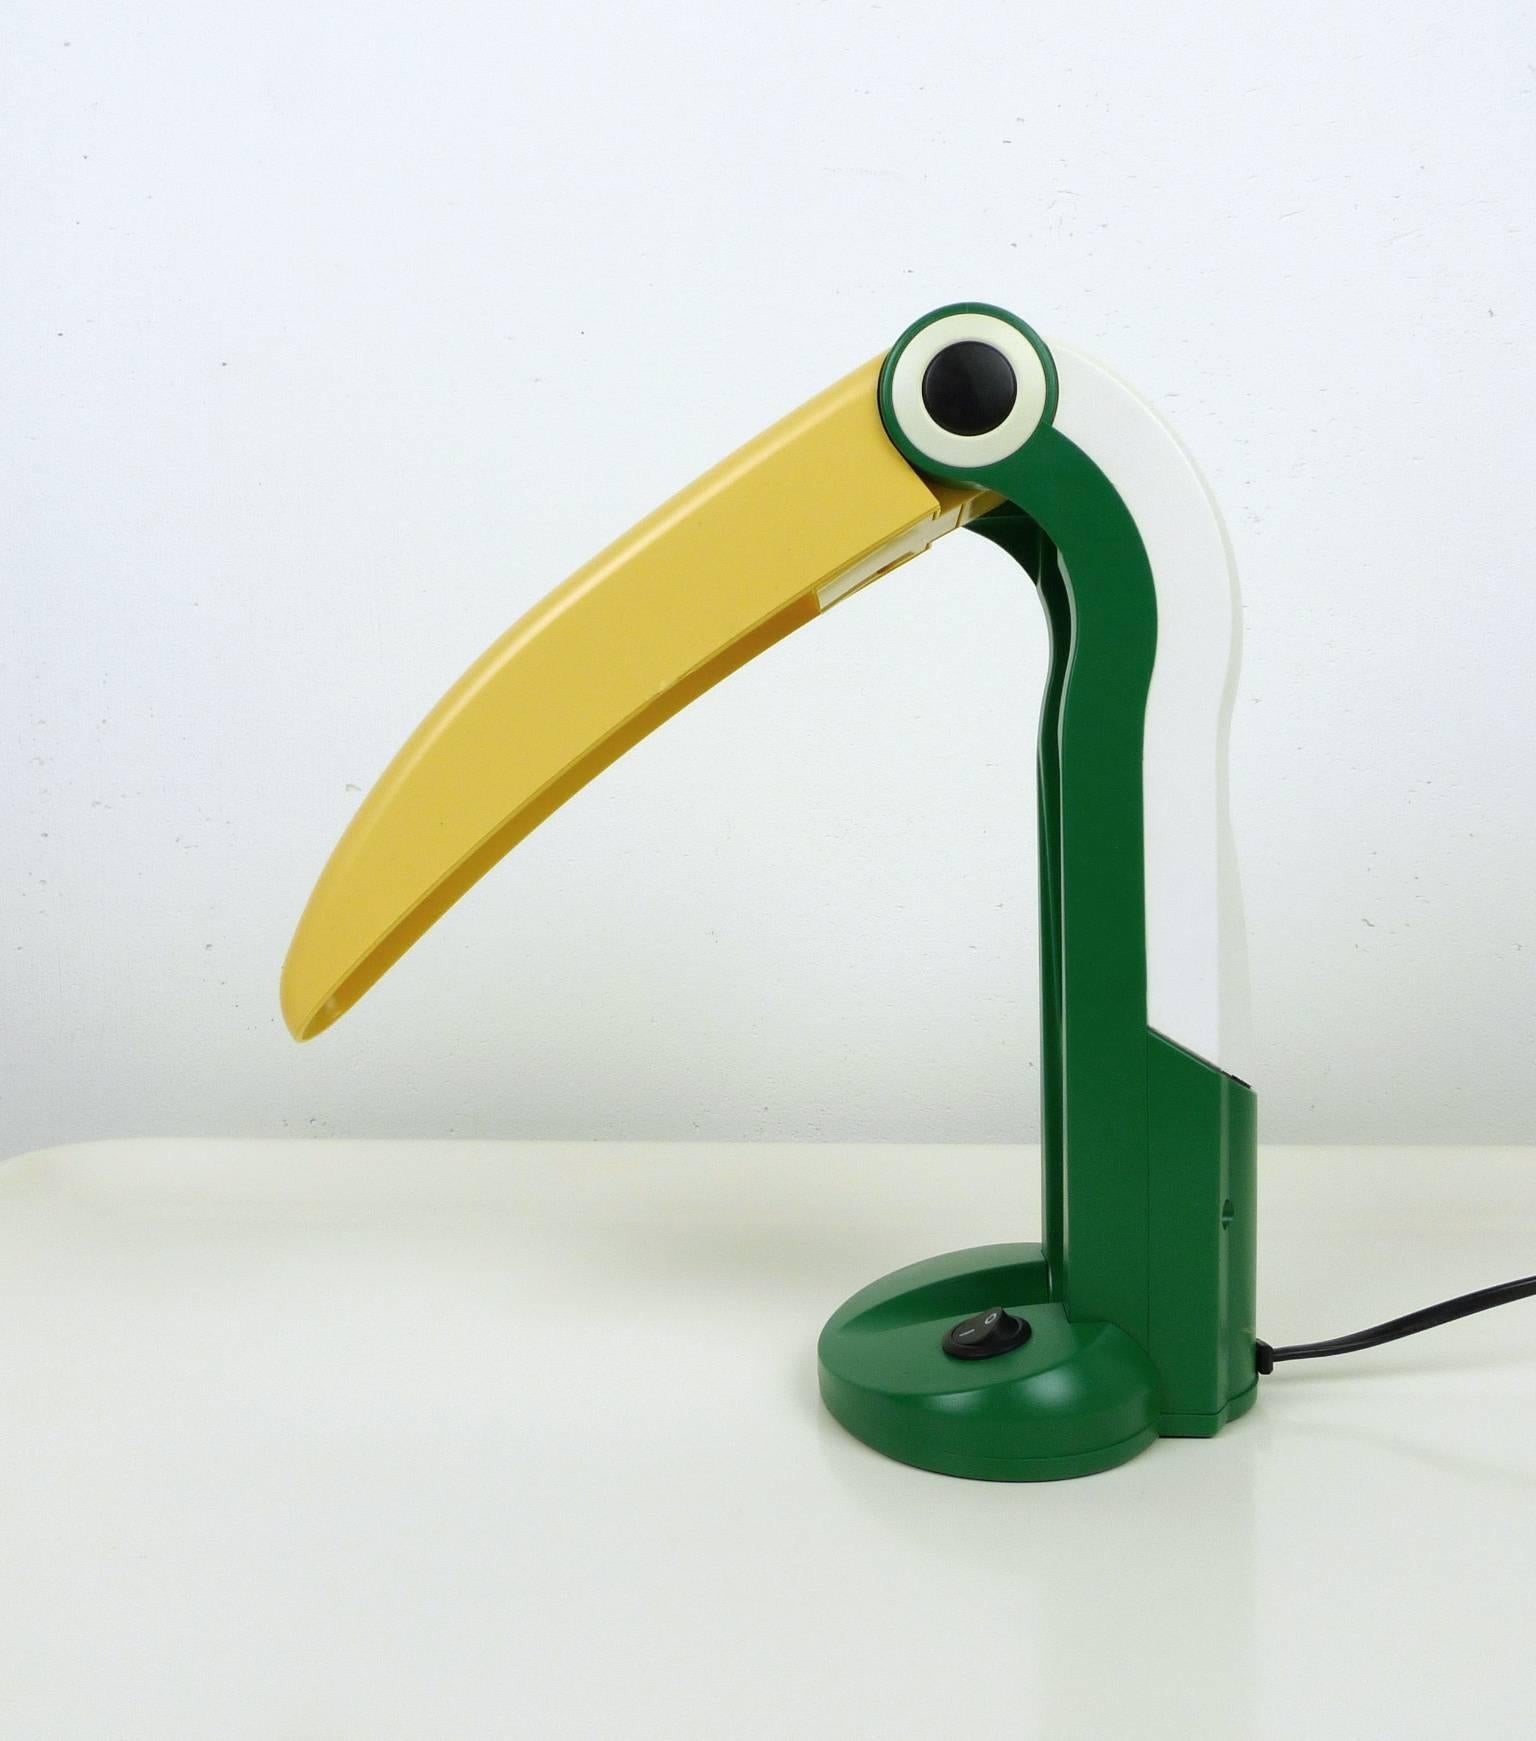 The Taiwanese product designer H.T. Huang designed this table lamp in the shape of a toucan in the 1980s. It was produced by the Belgian manufacturer Fantasia Verlichting. There is a light switch on the stand and the big yellow beak hides the light